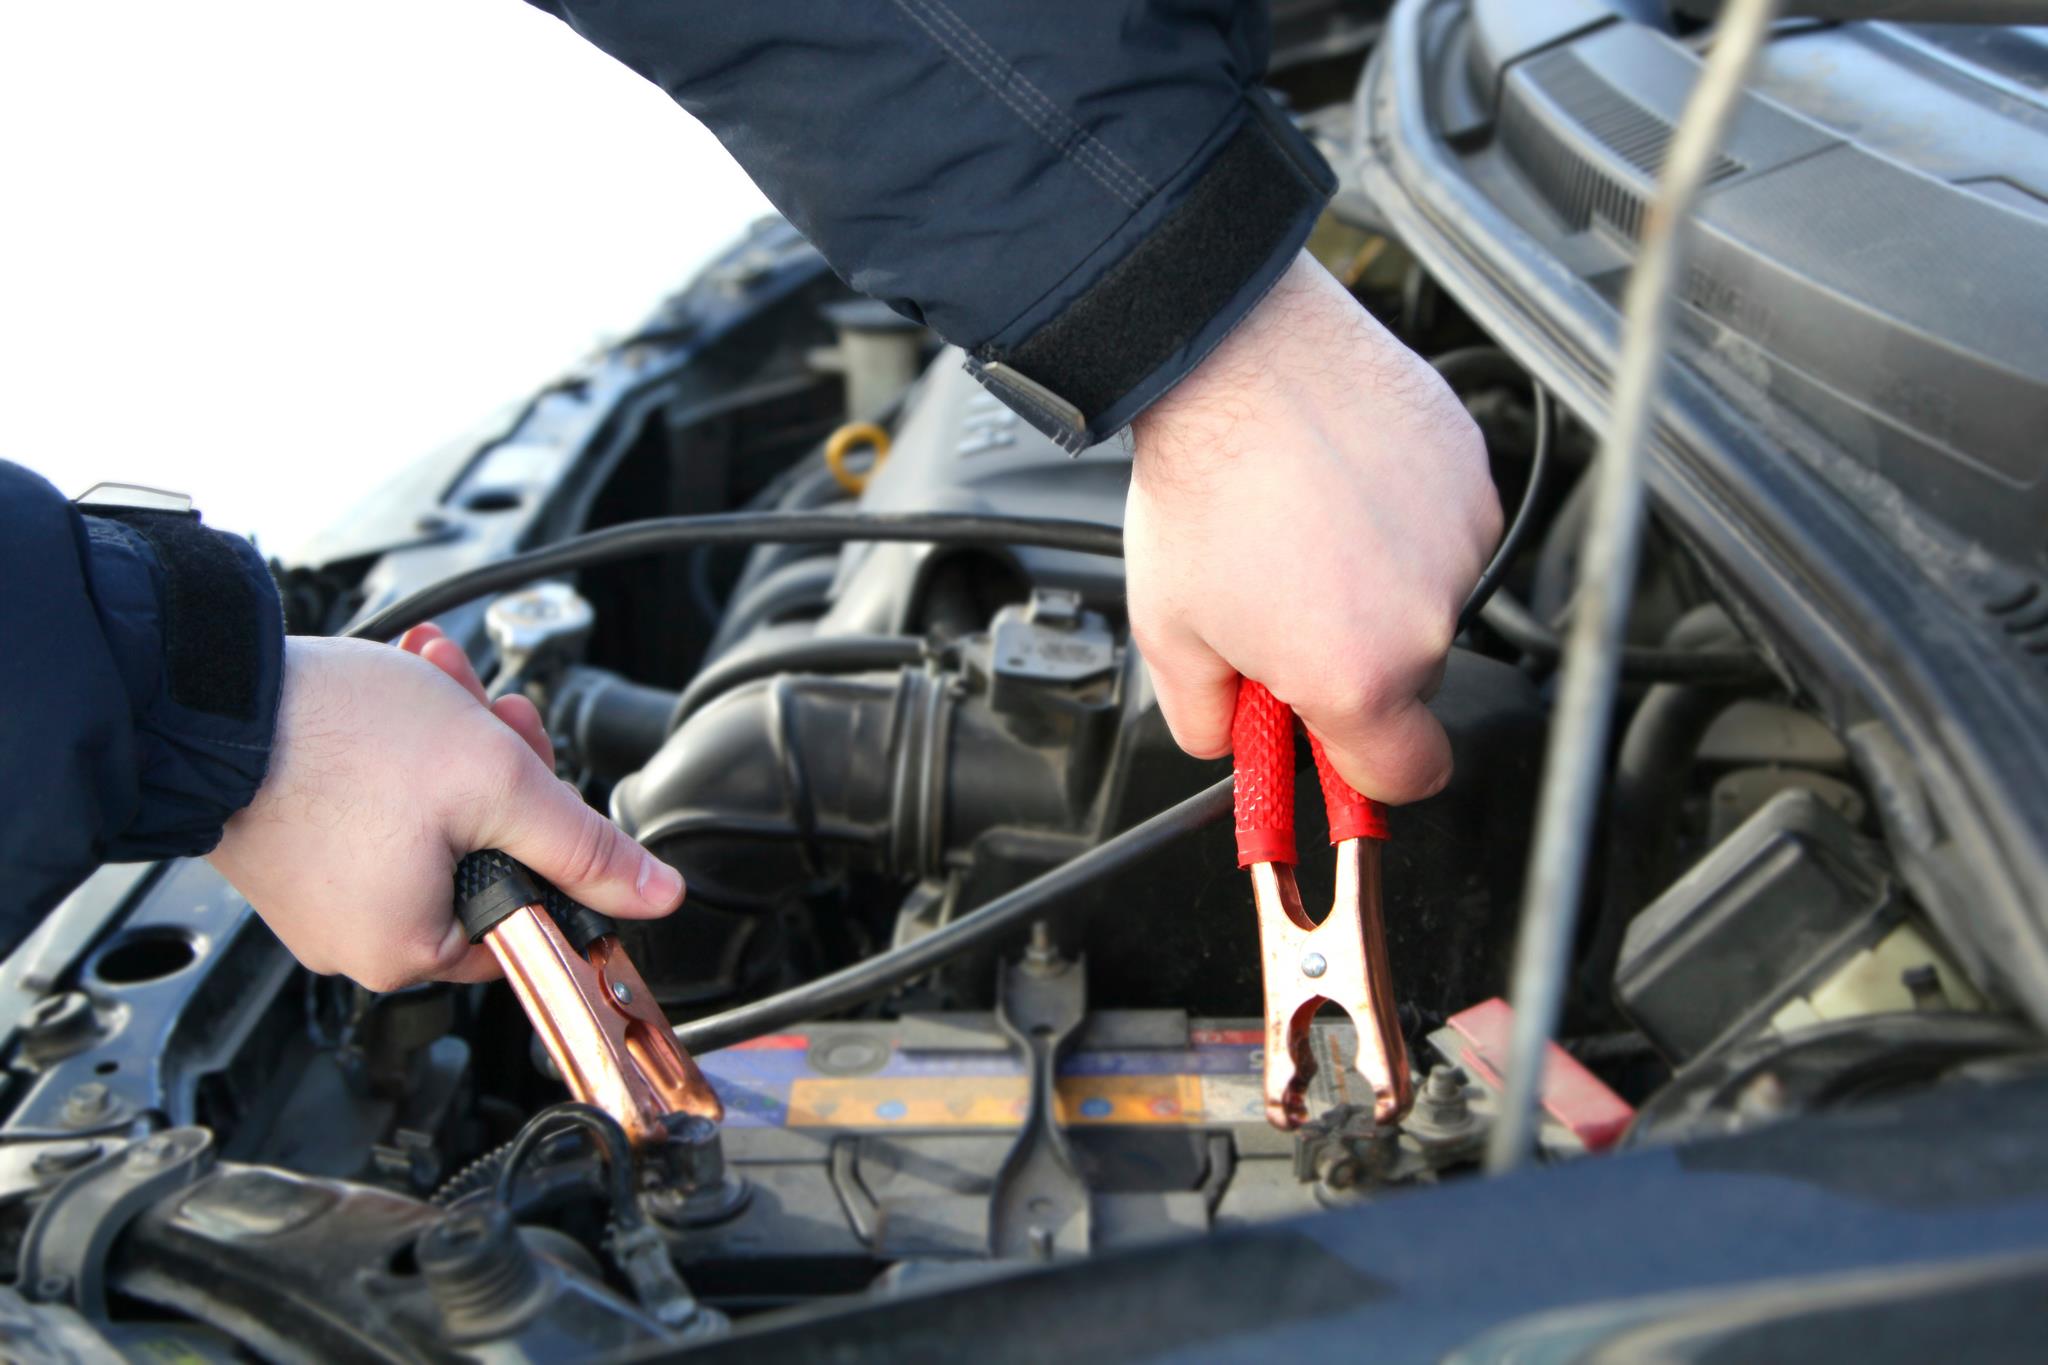 Follow these tips and let your battery survive cold weather